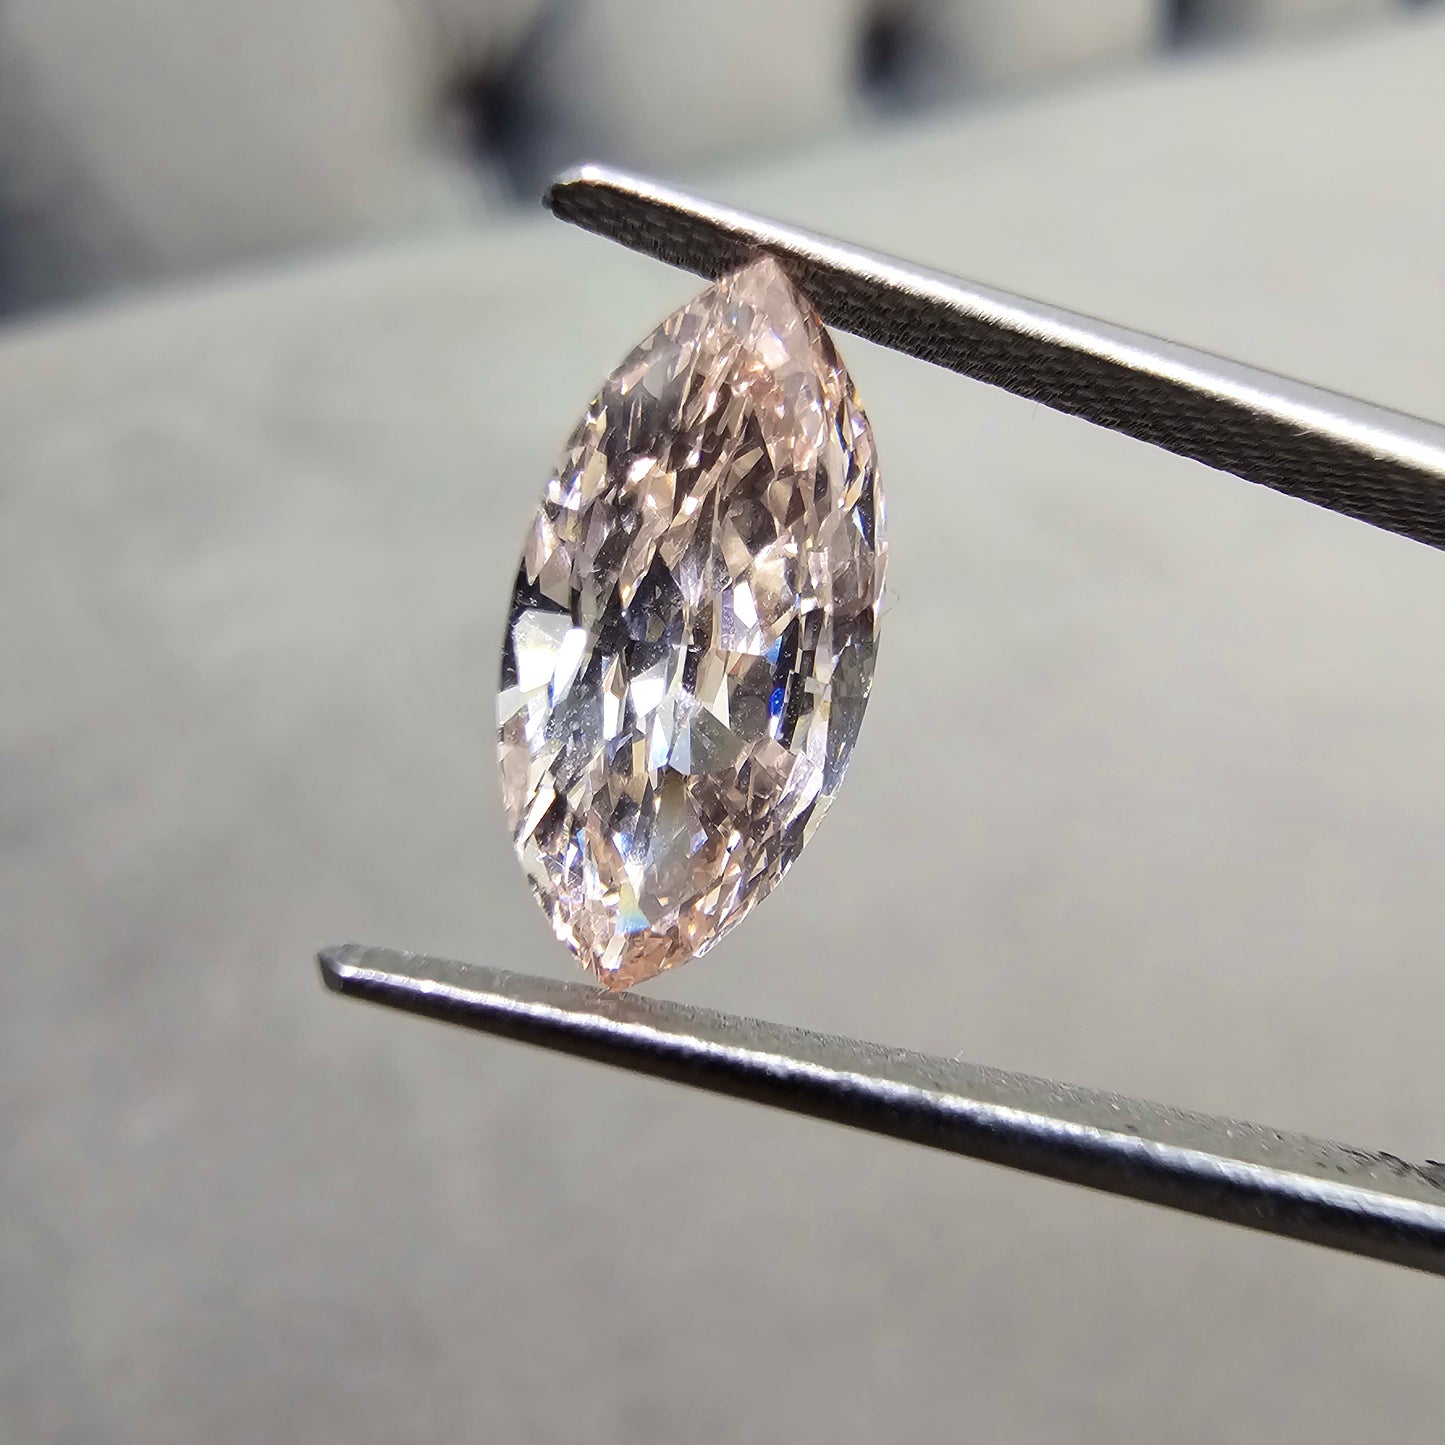 1.07 Carat Fancy Brownish Pink Diamond Radiant Cut Diamond Flawless Clarity Excellent + Very Good Cutting No Fluorescence GIA Certified Diamond